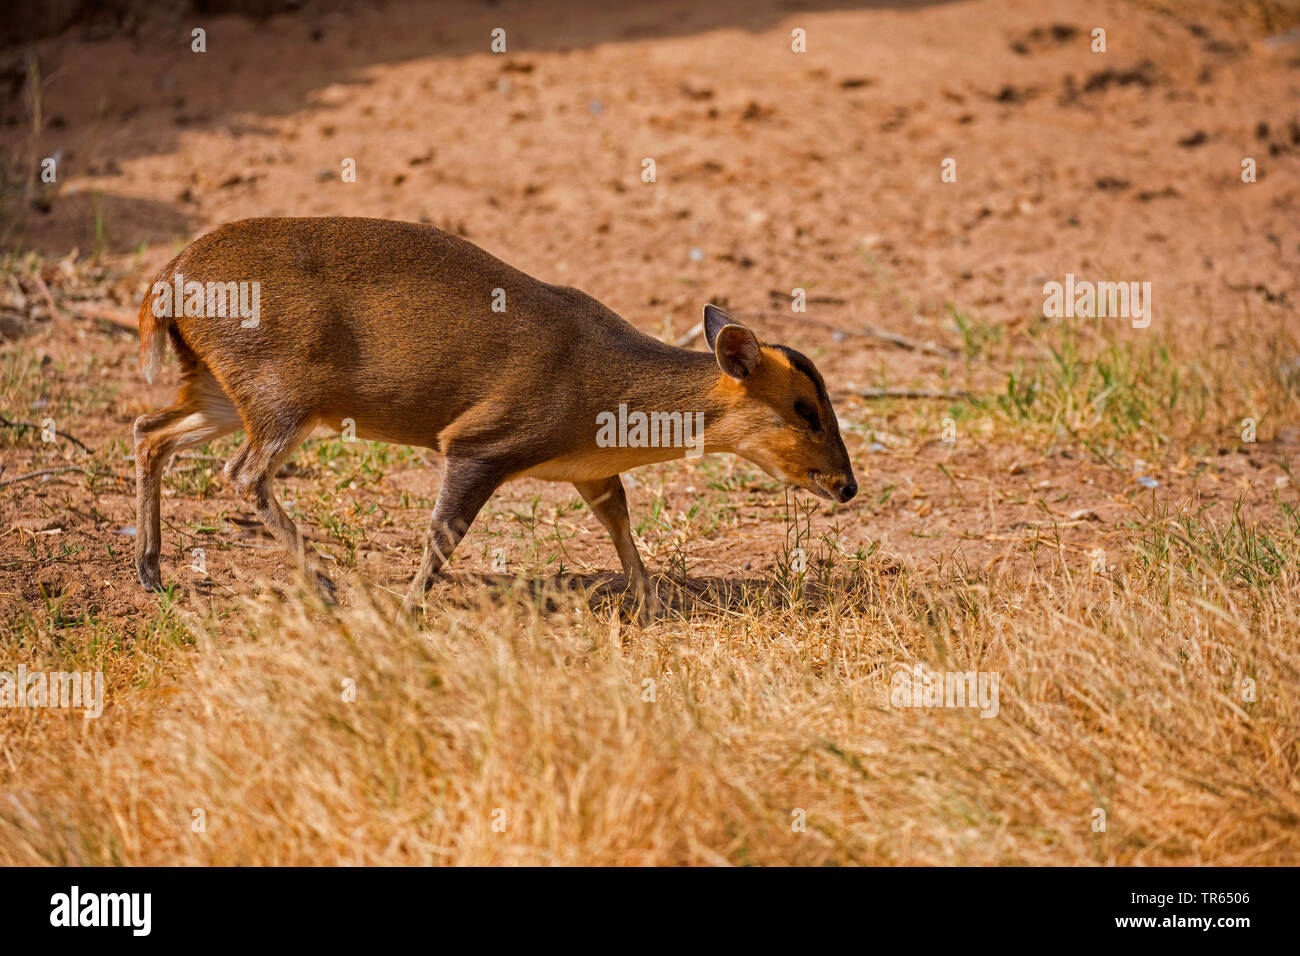 Chinese muntjac, Reeve's muntjac (Muntiacus reevesi), grazing female, side view Stock Photo